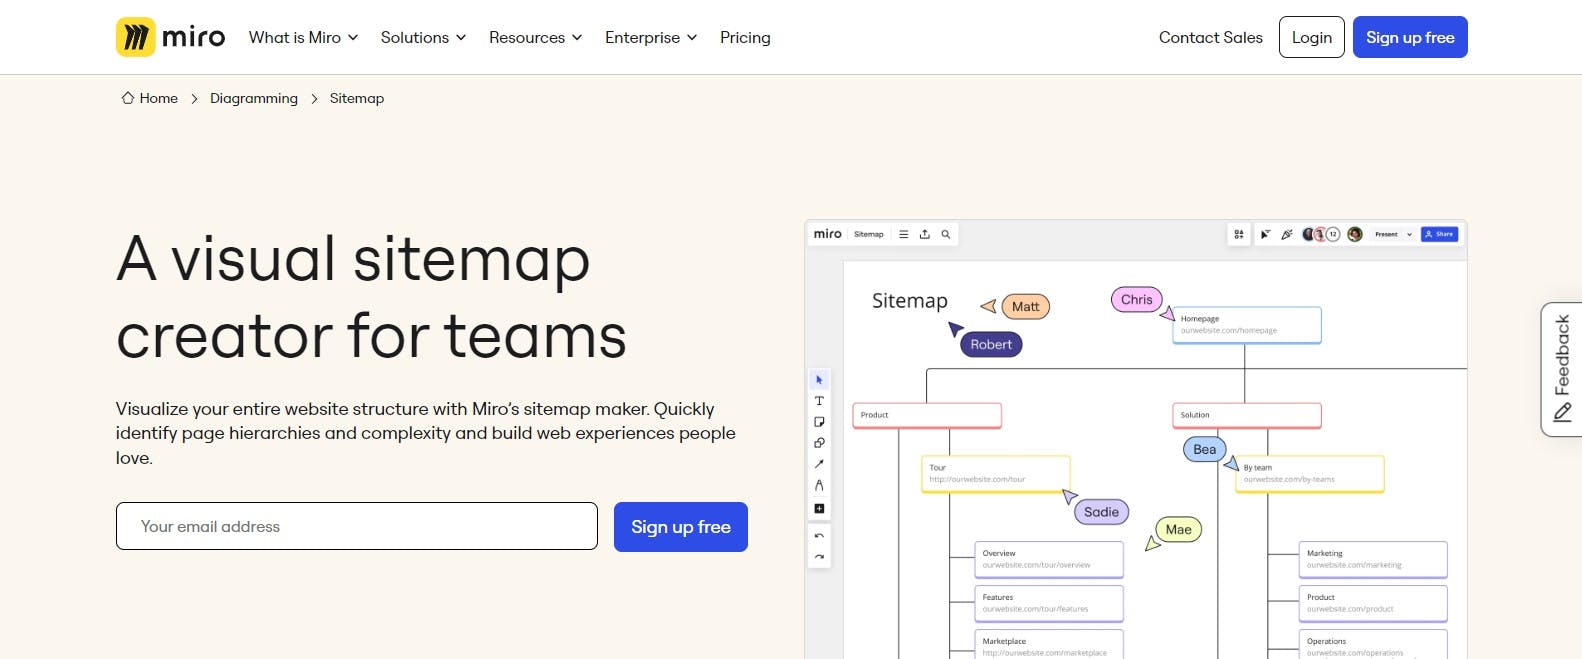 A visual sitemap creator for teams